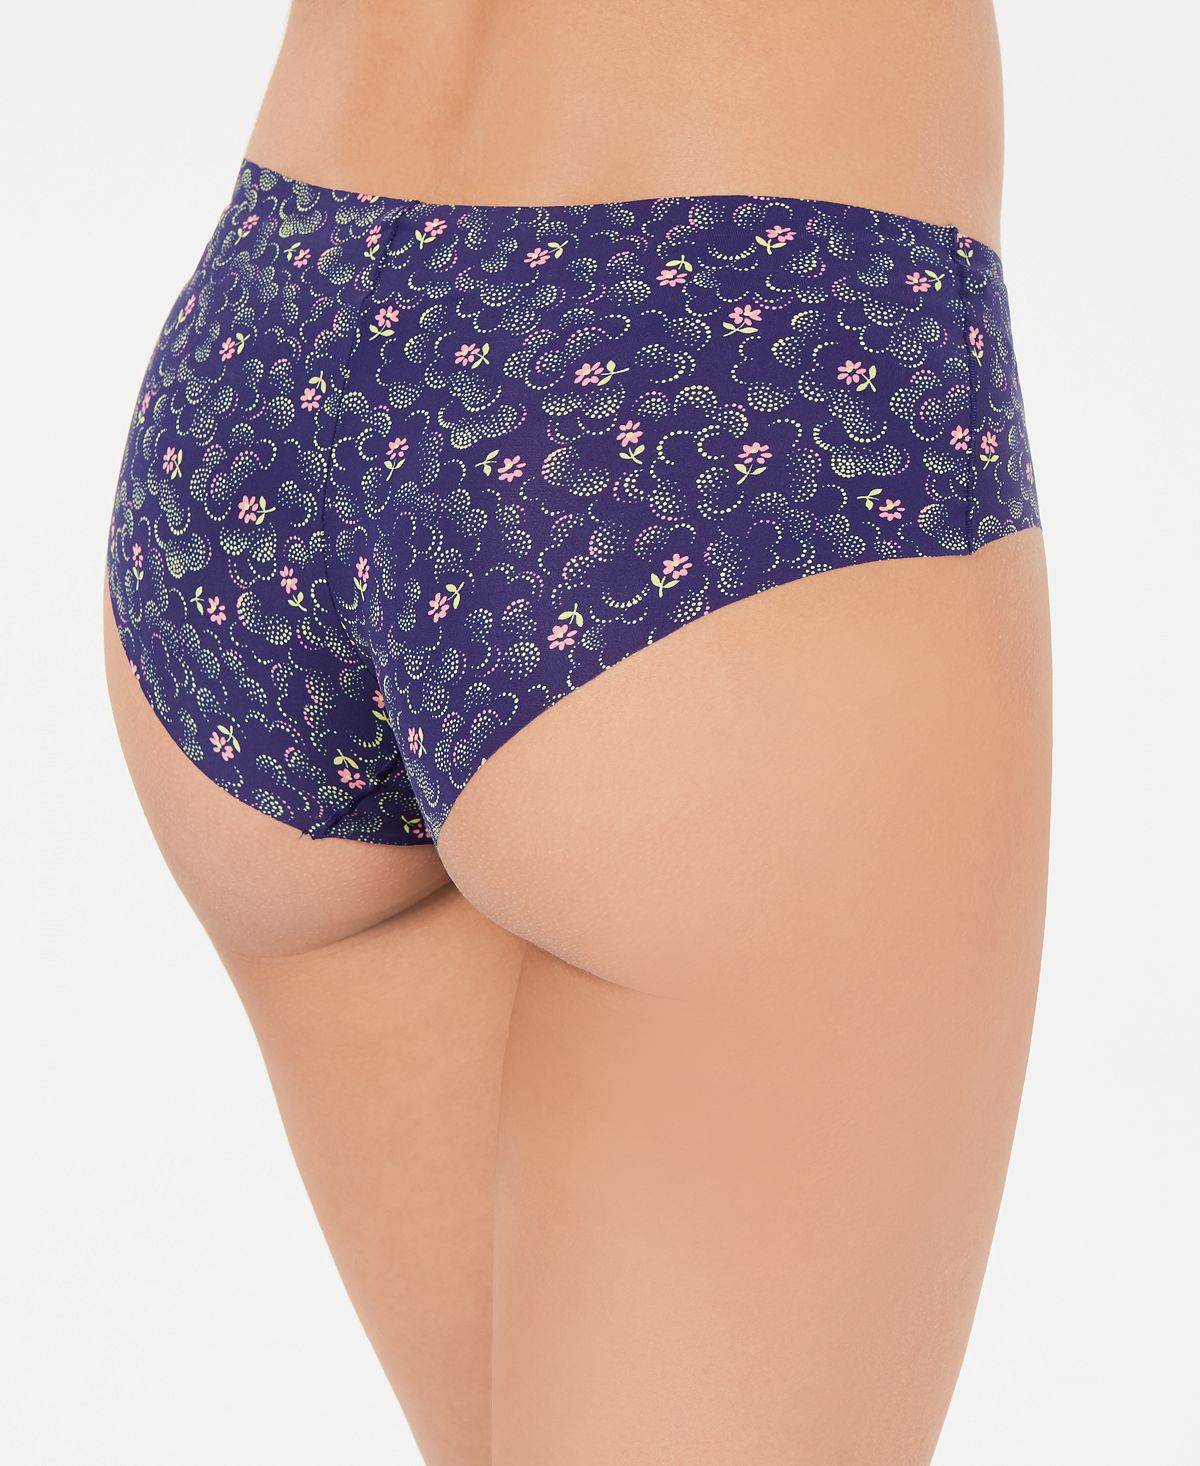 Calvin Klein Invisibles Hipster Underwear D3429 Whimsical Floral